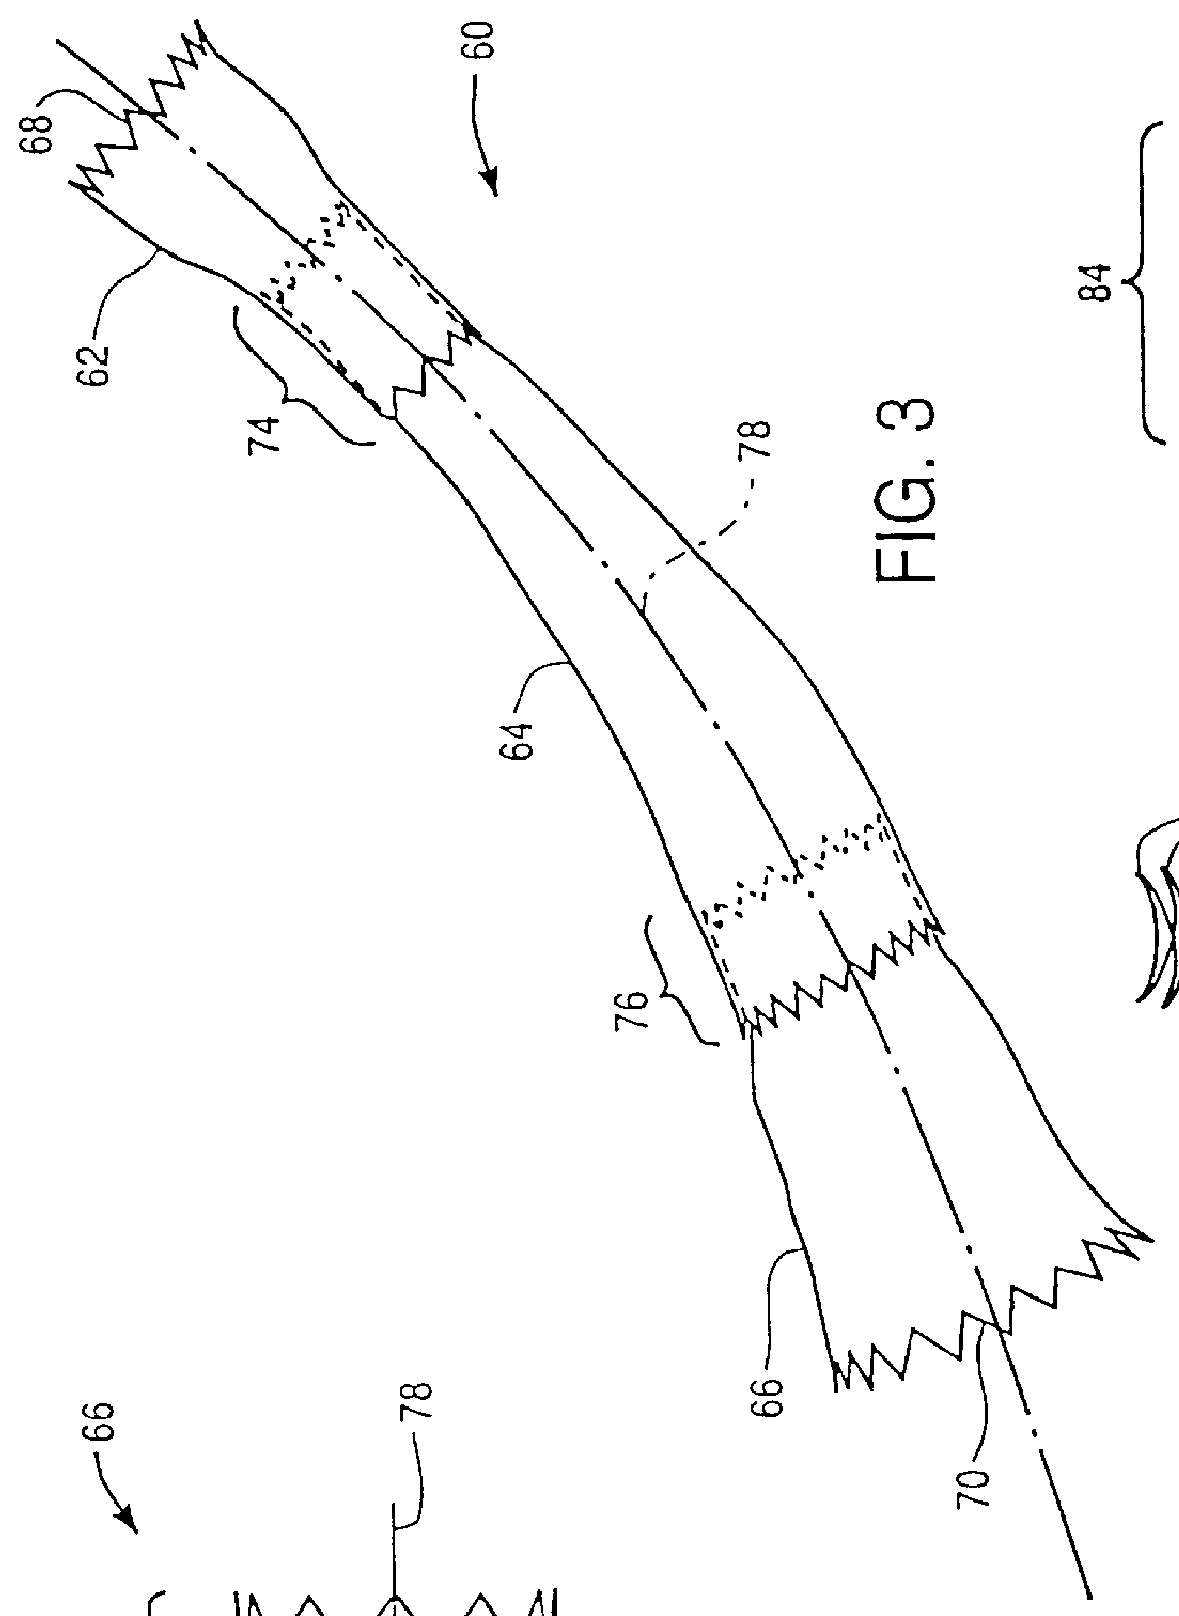 Method for deploying cuff prostheses